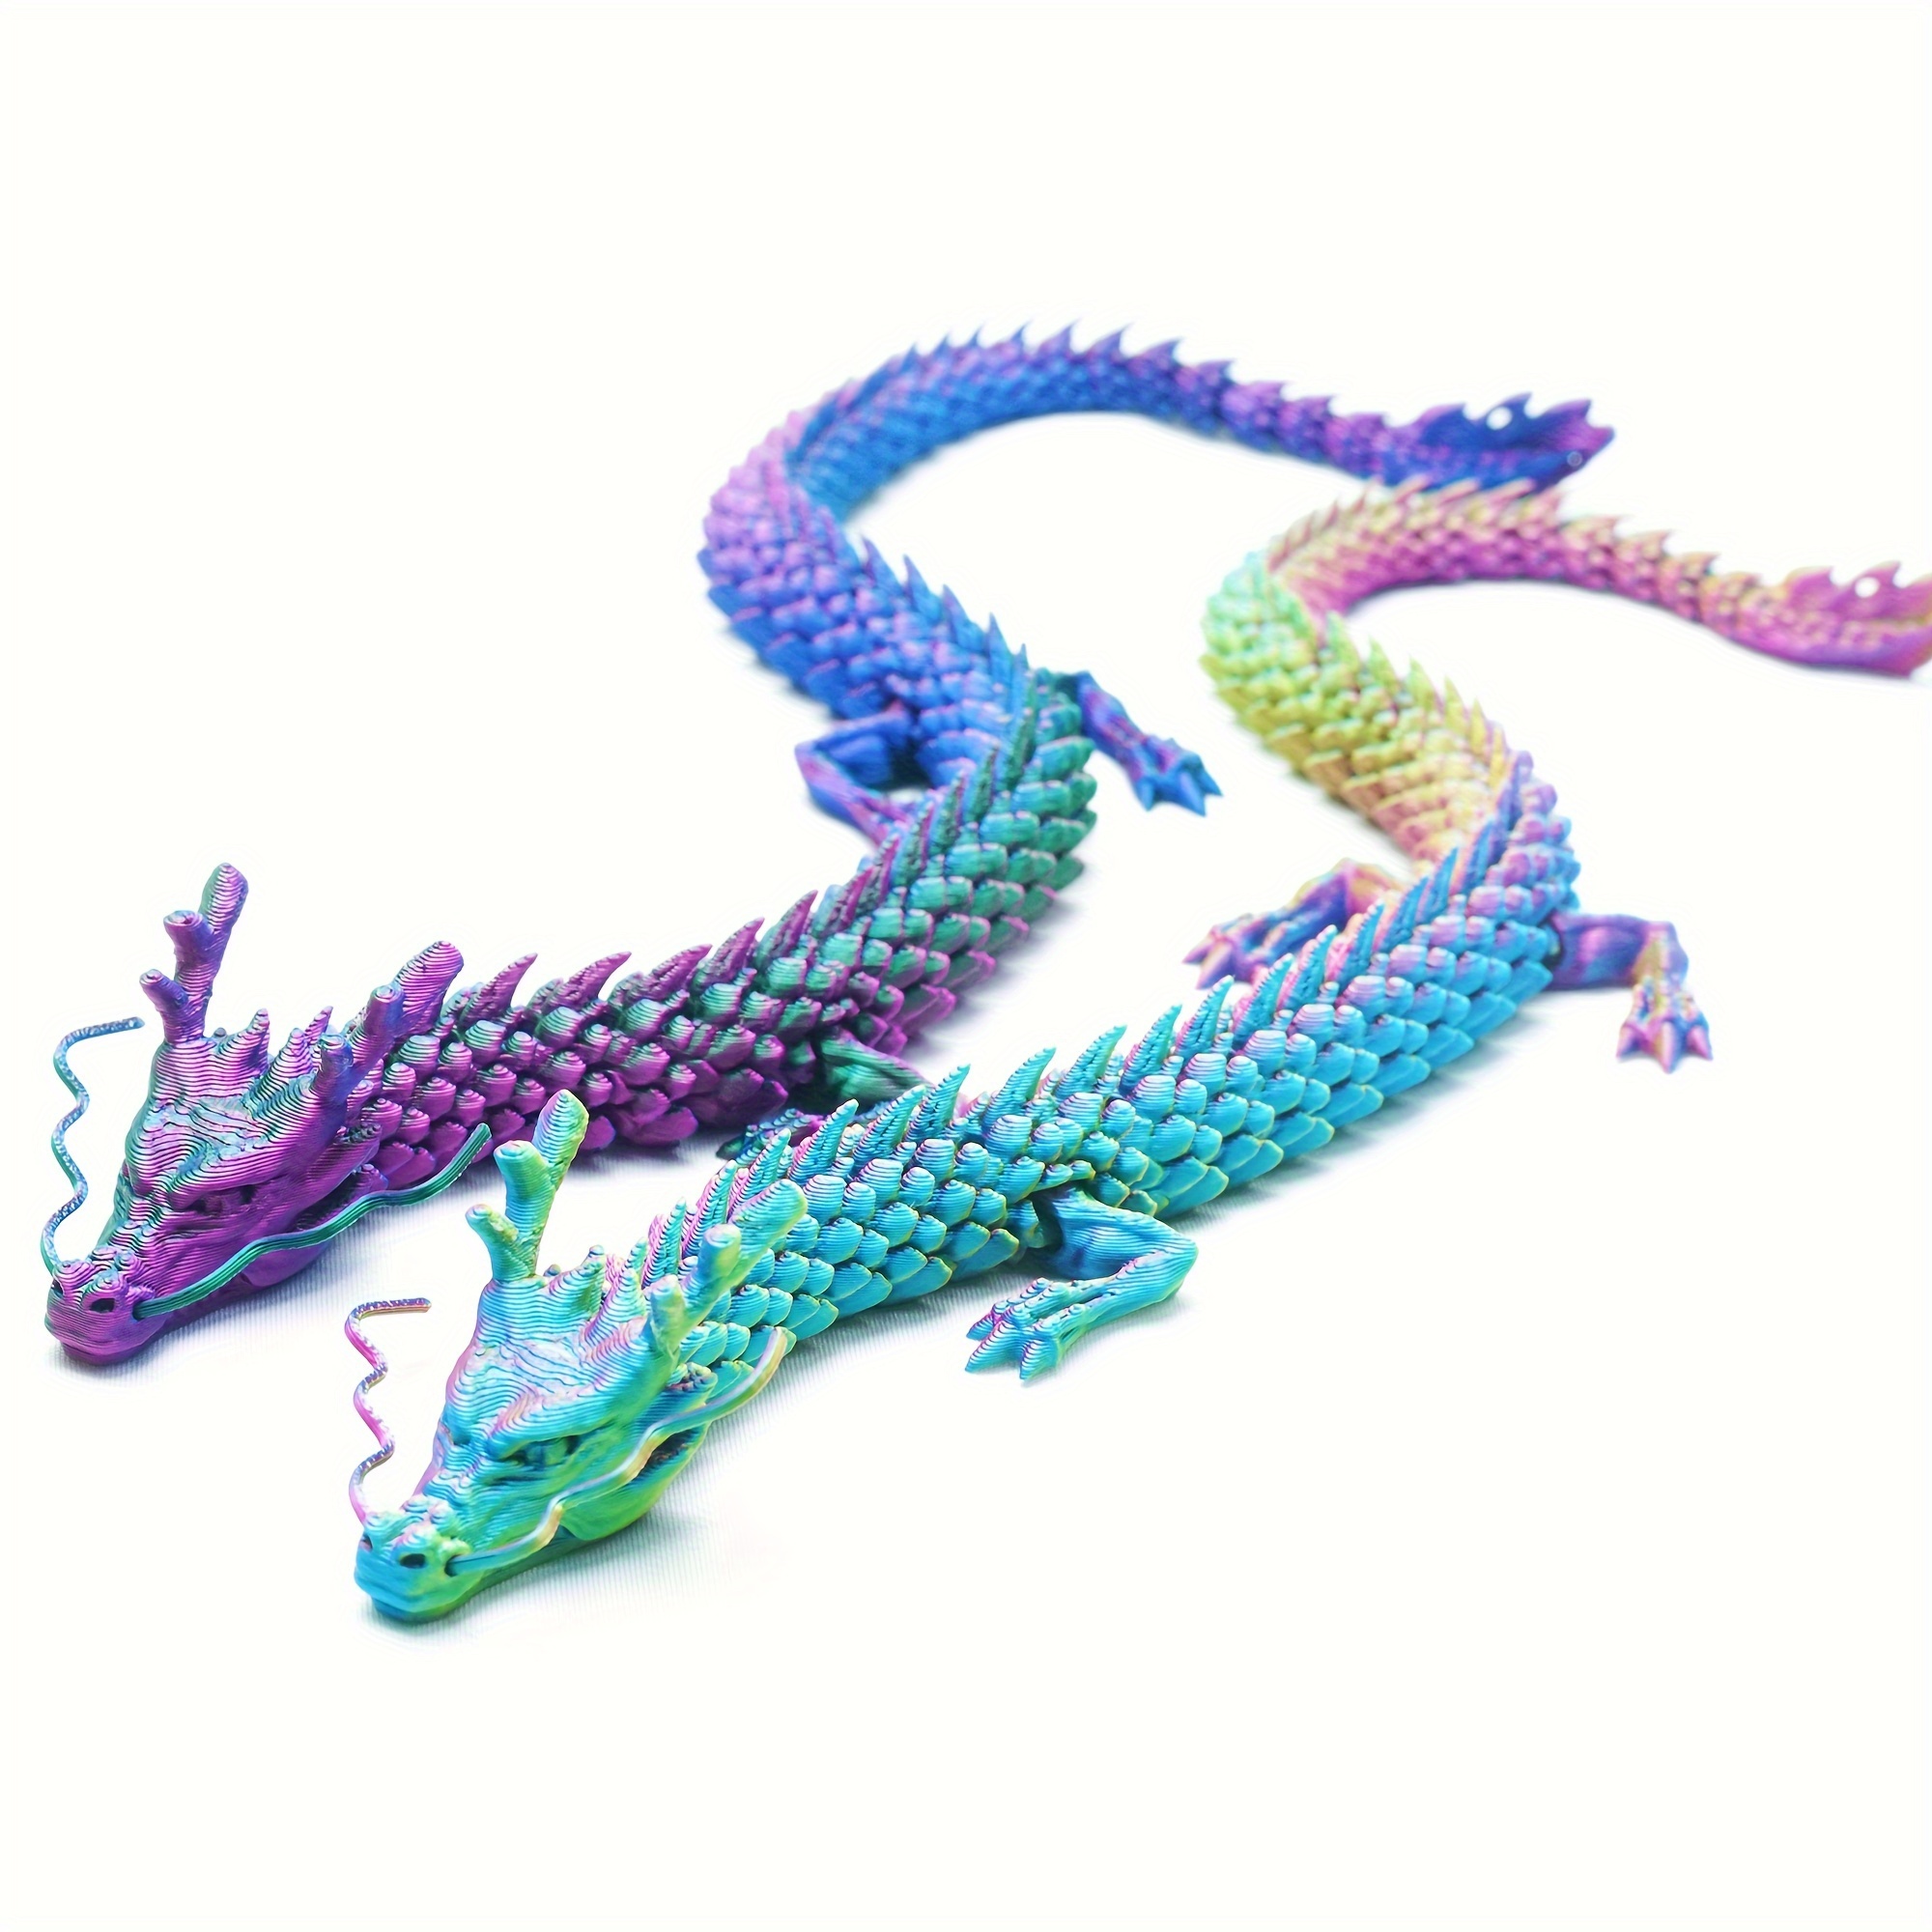 

2pcs 3d Printed Dragon Chinese Loong, Whole Body Joints Can Be Freely Moved And Decompressed. Creative Collection Of Toys, Home Decoration, Table Decorations